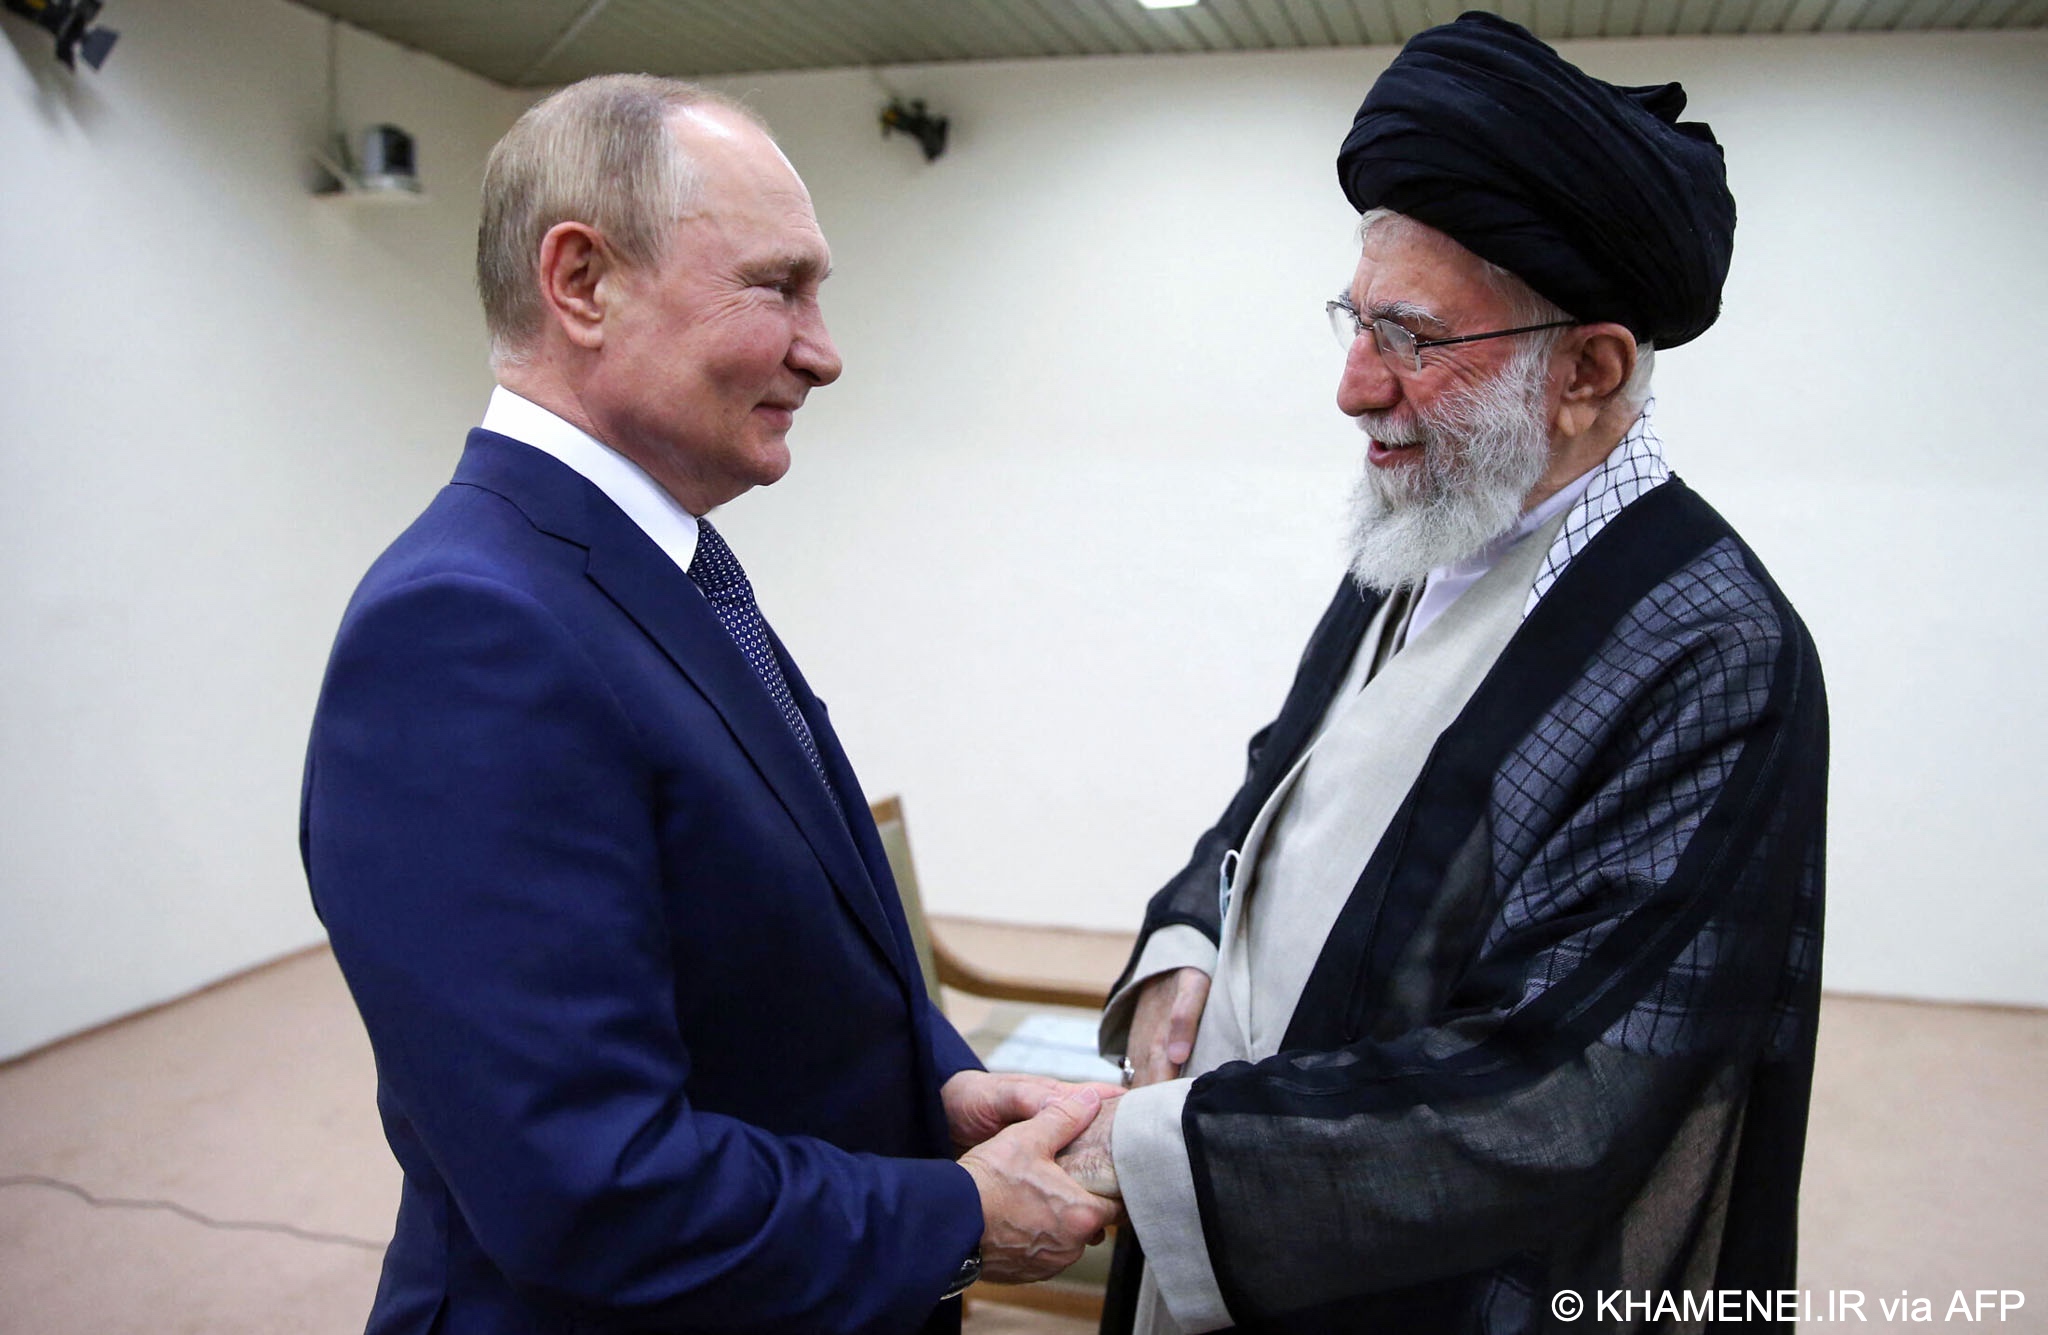 Working together against Western sanctions, not being rivals on the world oil market and shaping long-term military cooperation: this is how Russia envisions their joint strategy, and Iran's most powerful man, Ayatollah Ali Khamenei, is in agreement.